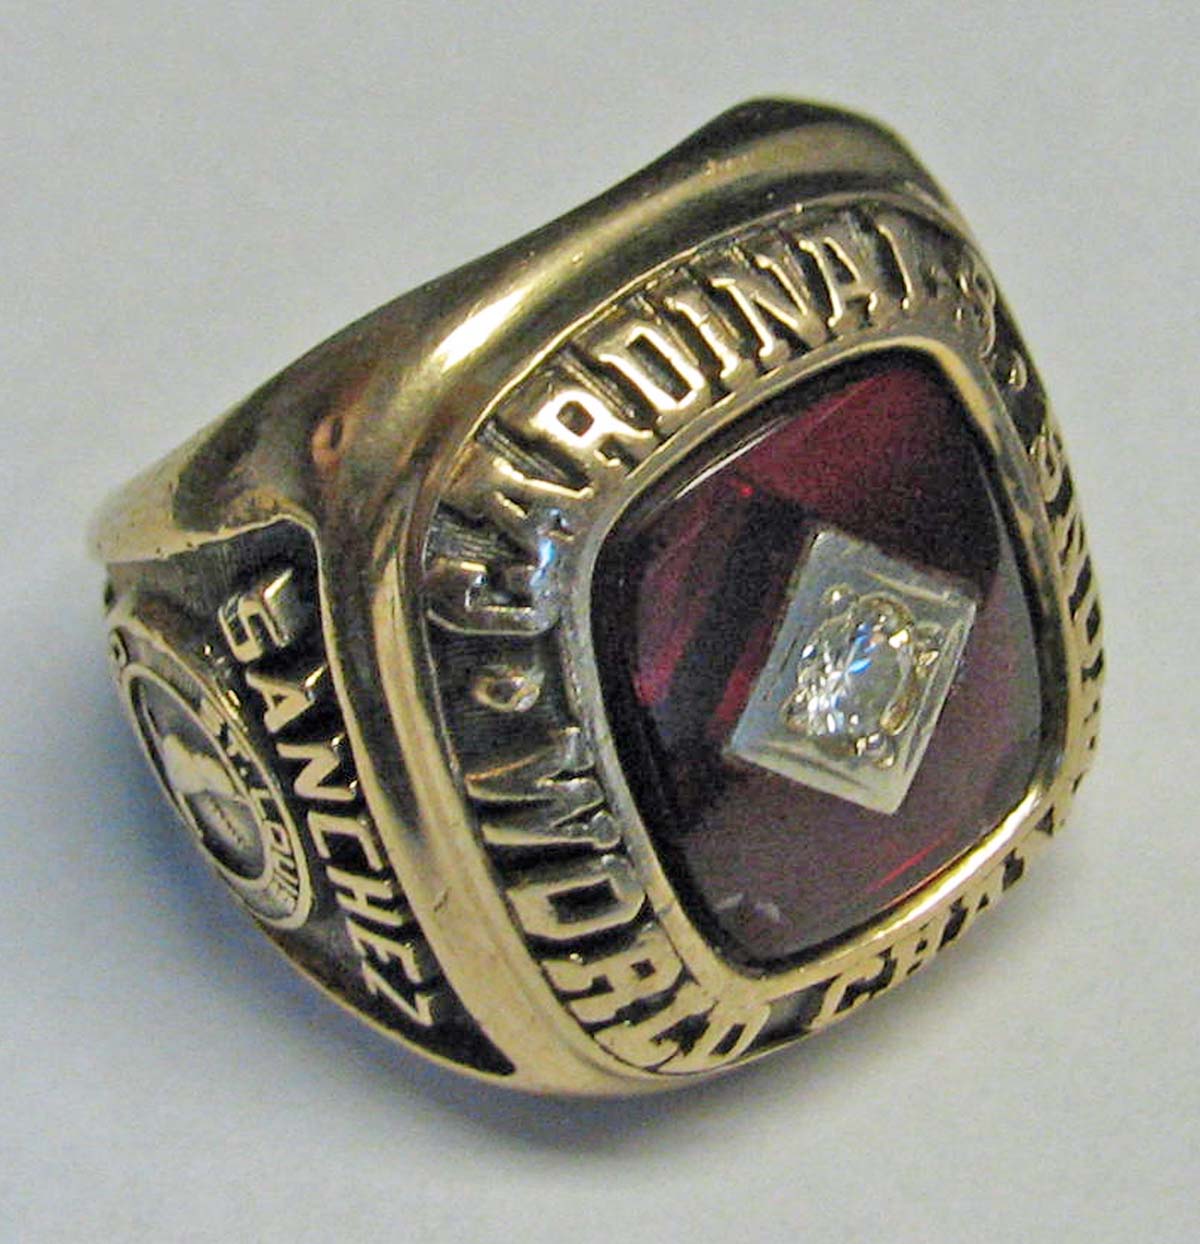 St. Louis Cardinals 1982 World Championship Rings, McGee, Sutter